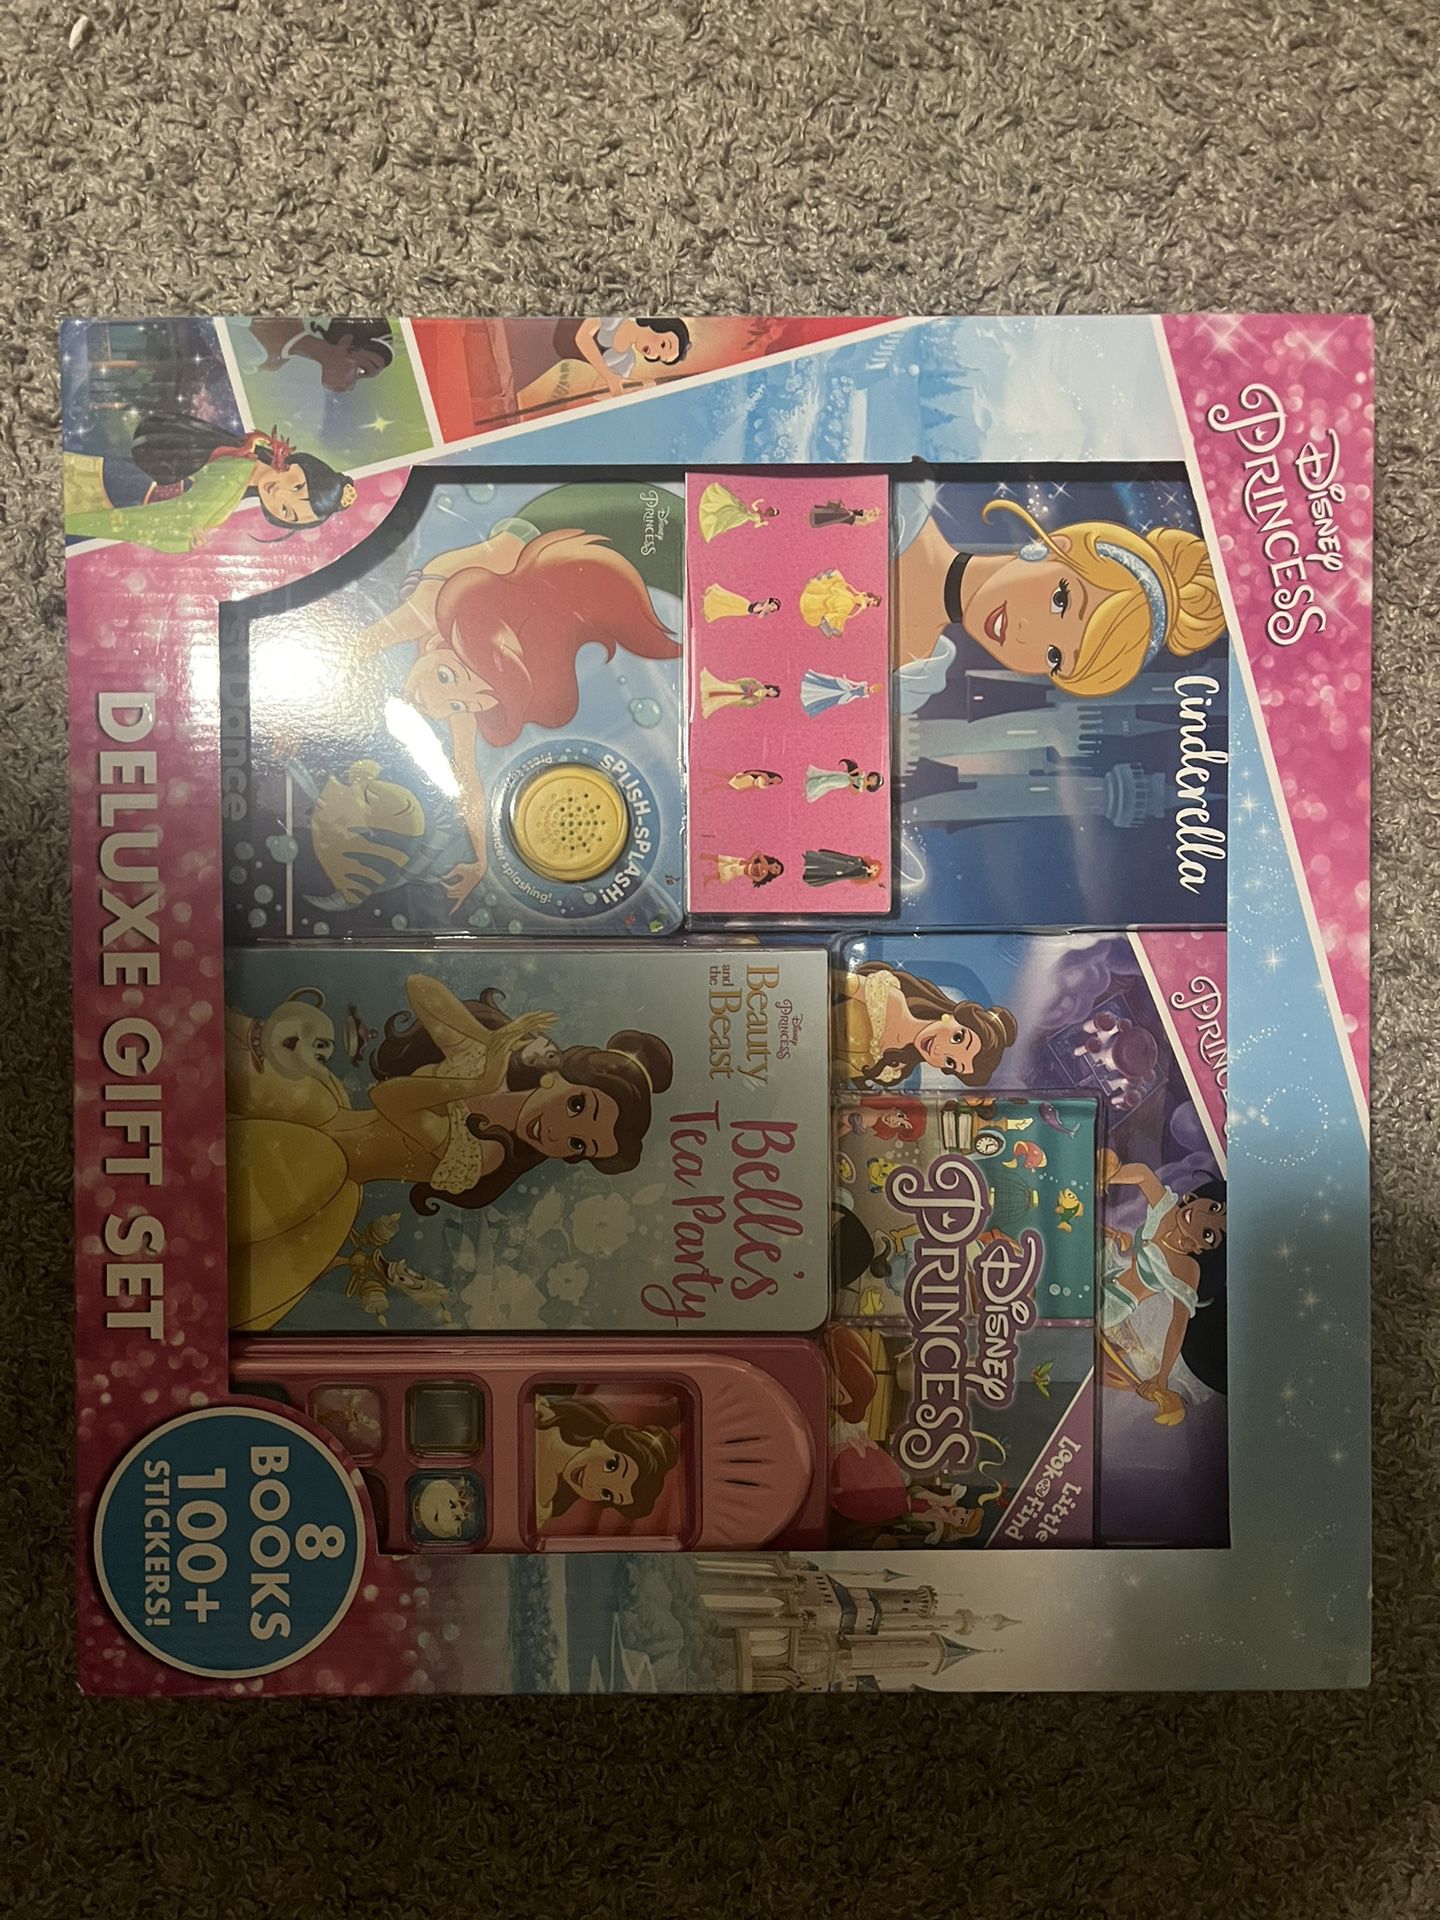 Disney princess deluxe gift set 8 books and 100+ stickers 